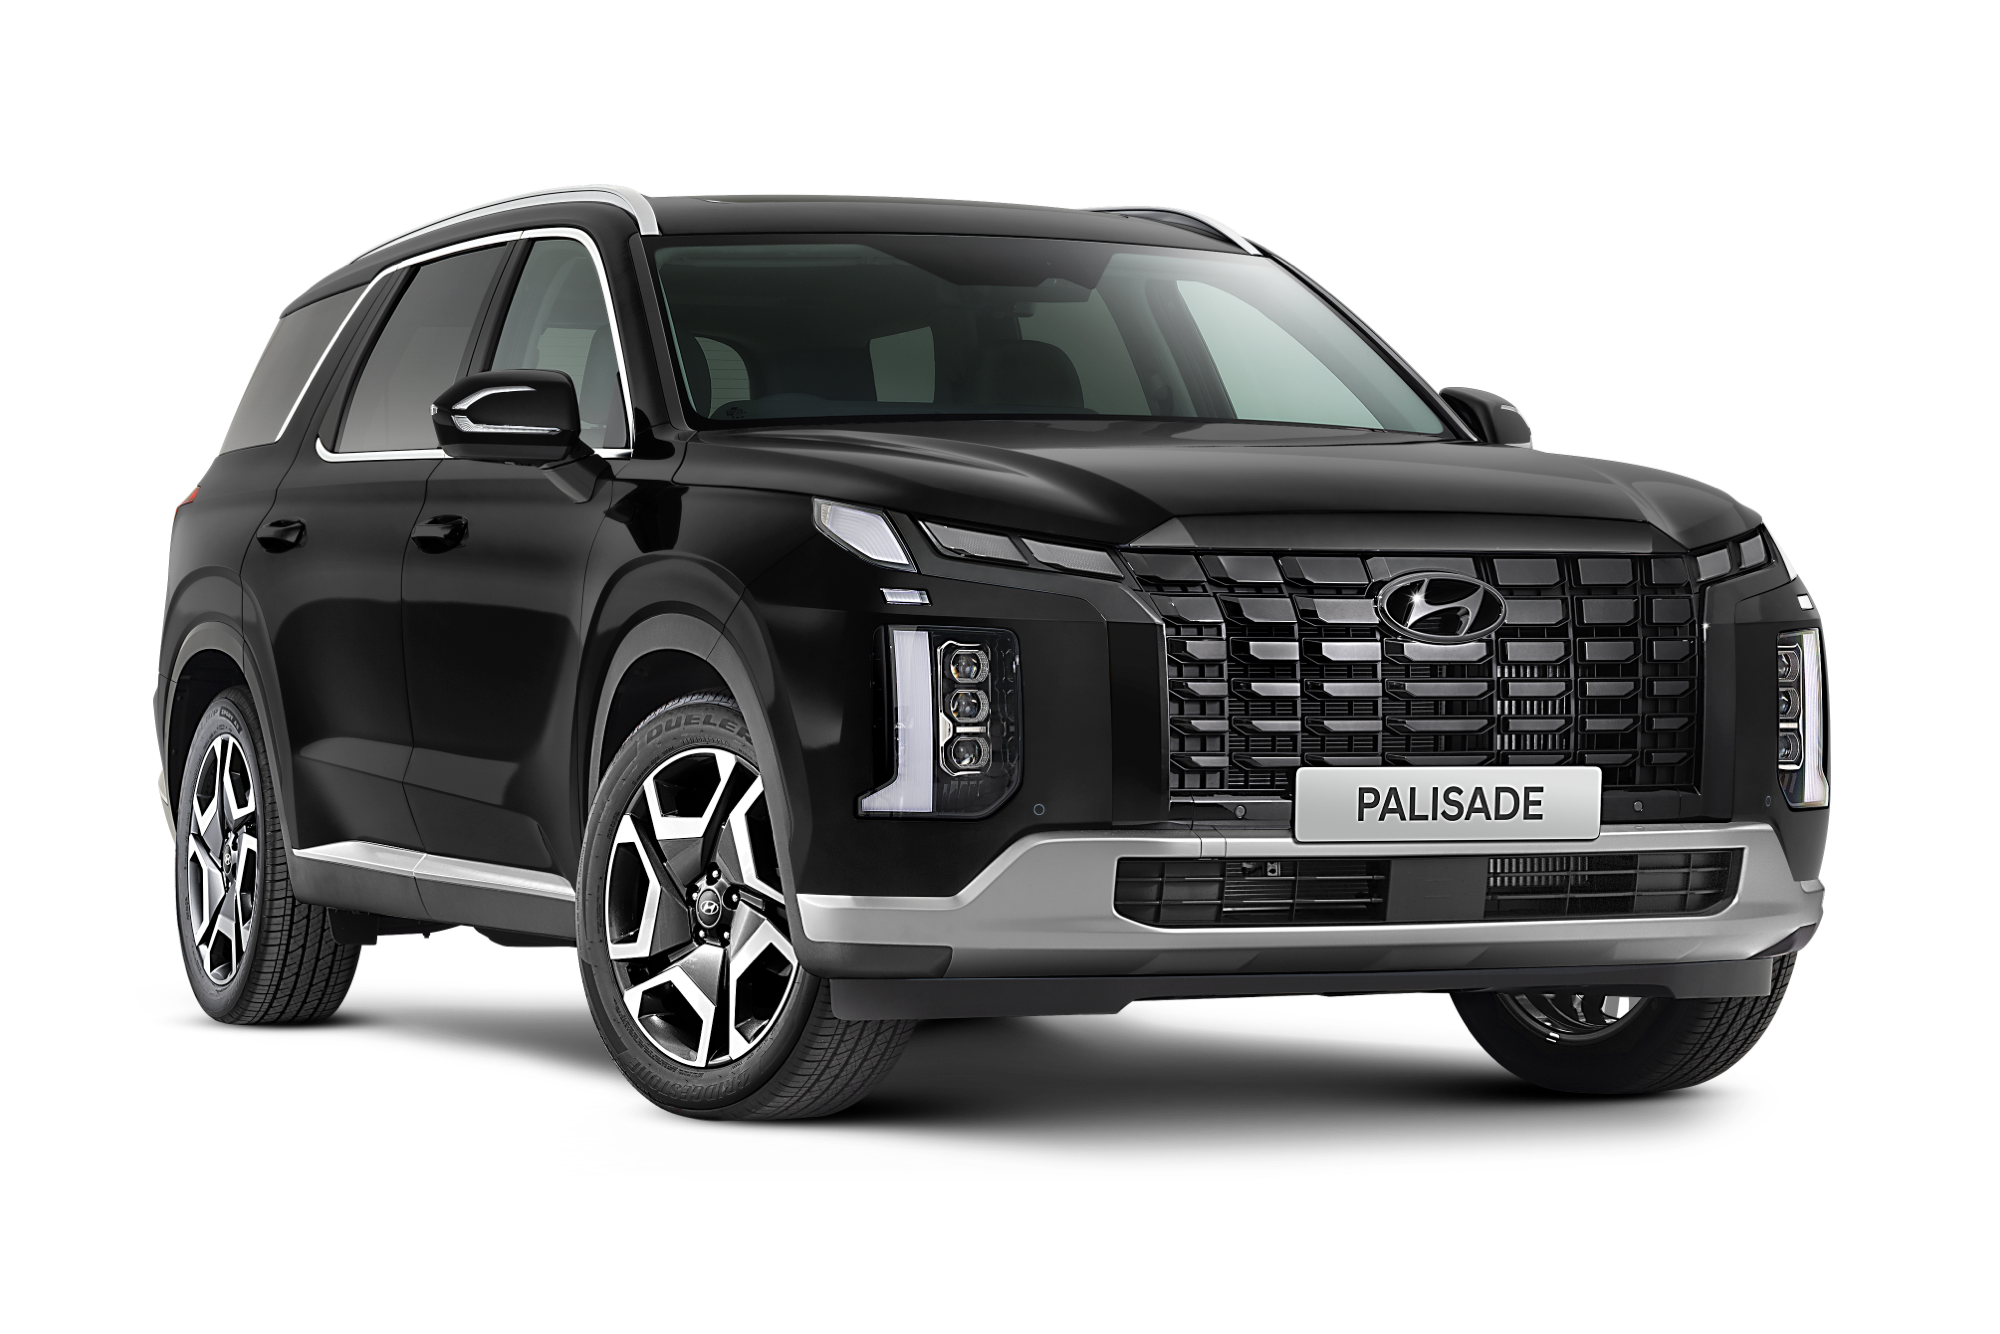 Palisade Elite 7S 3.8L V6 Petrol GDi 8-Speed Automatic FWD Image